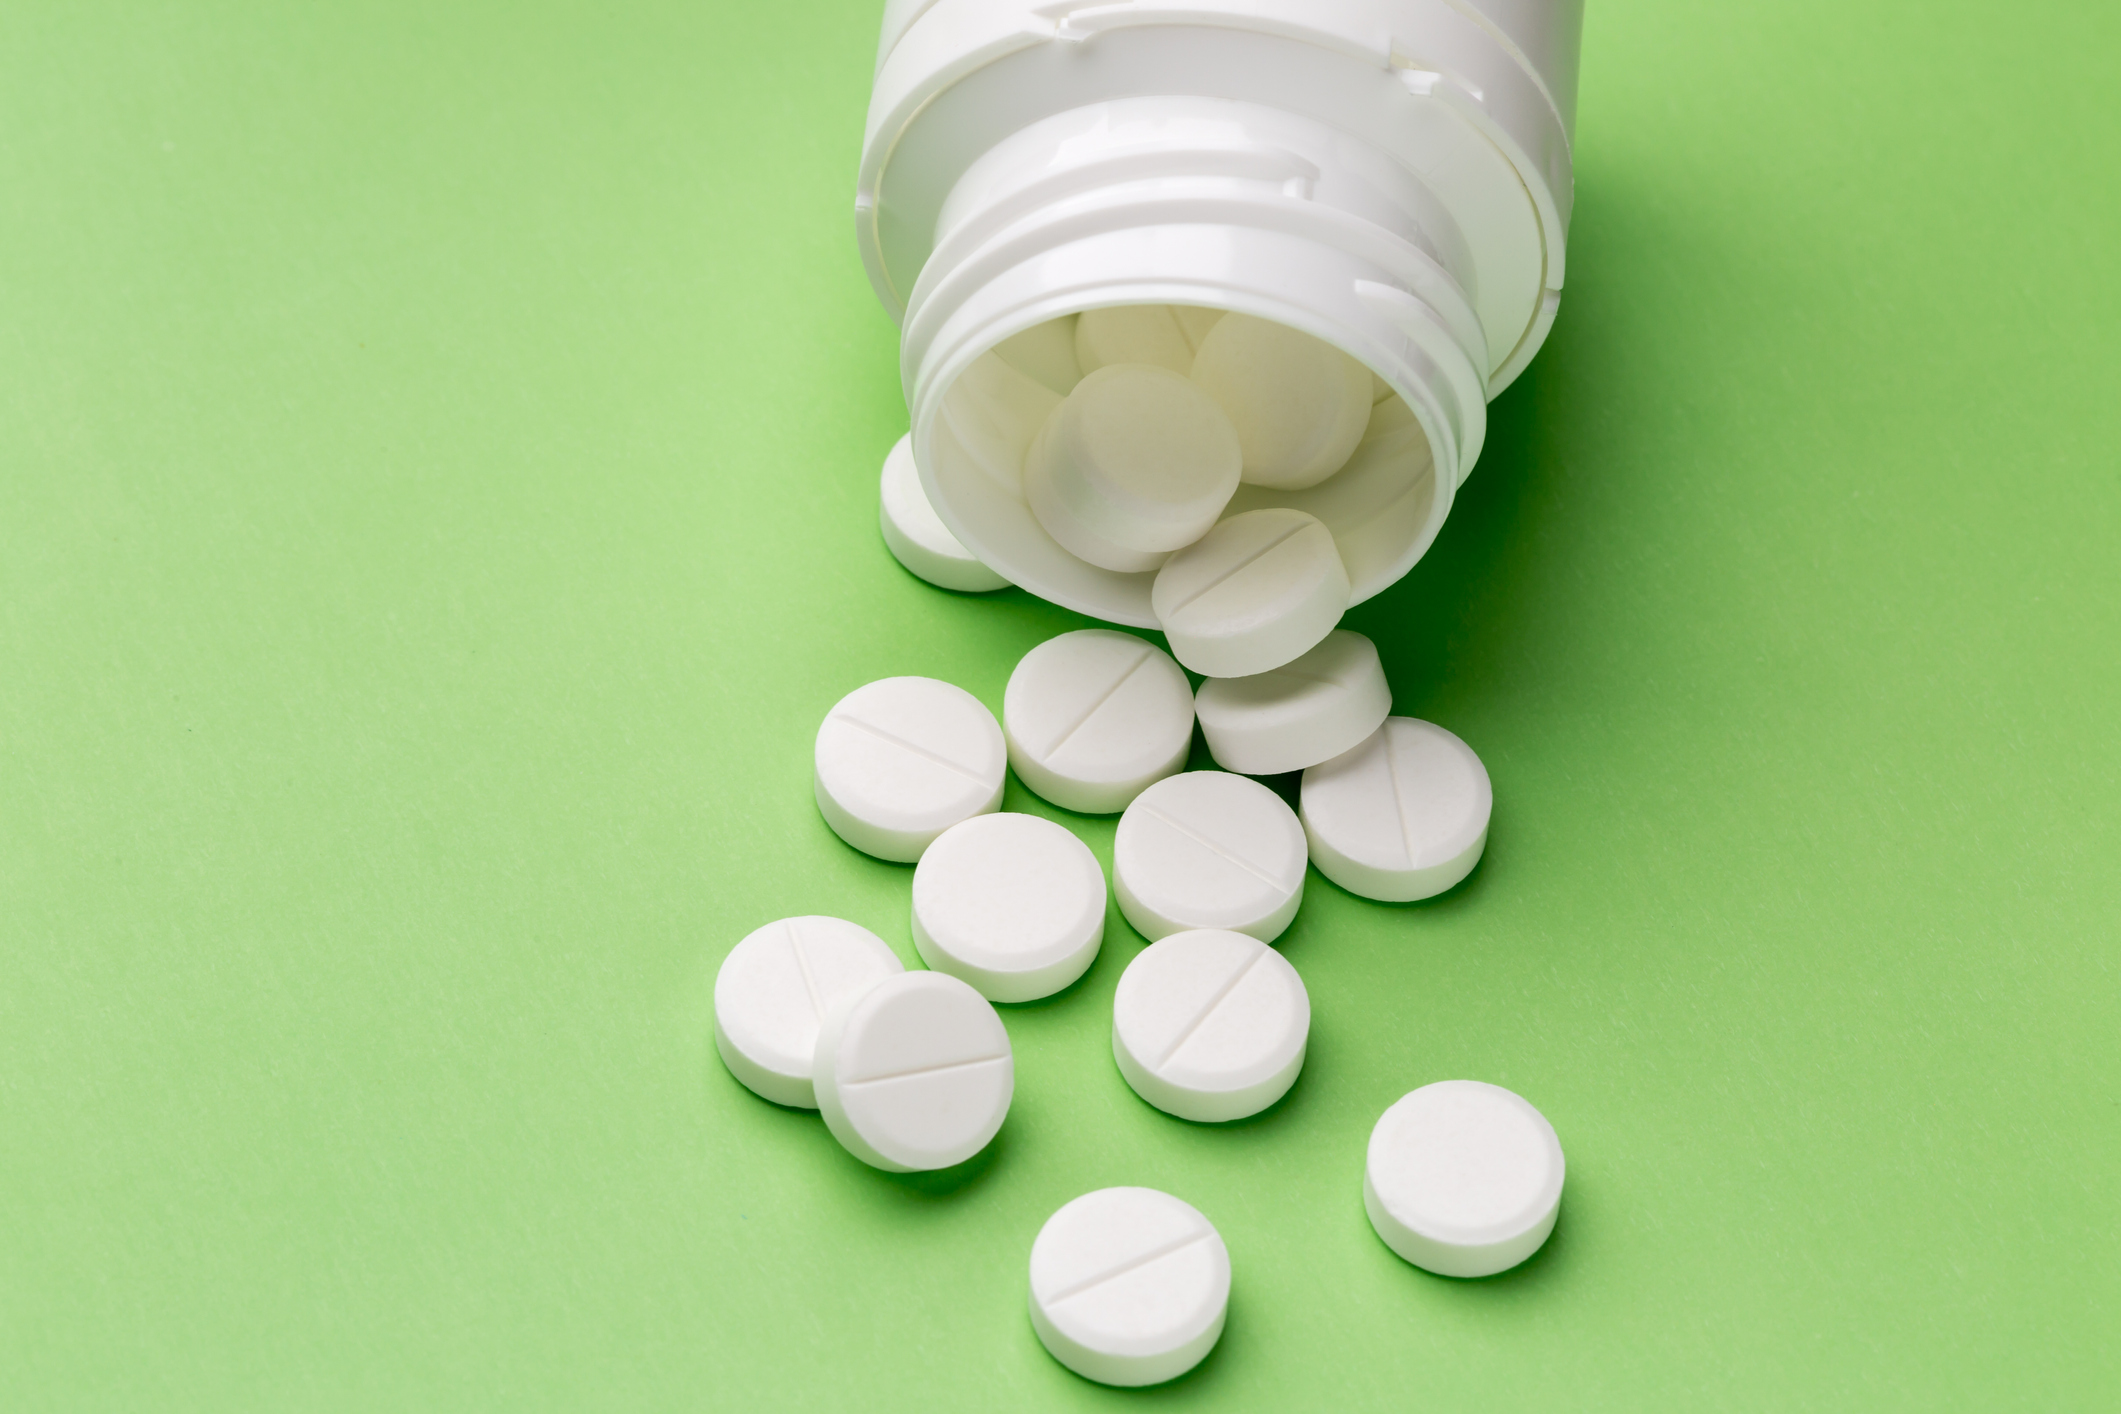 A low-dose aspirin a day may keep the worst of COVID-19 away